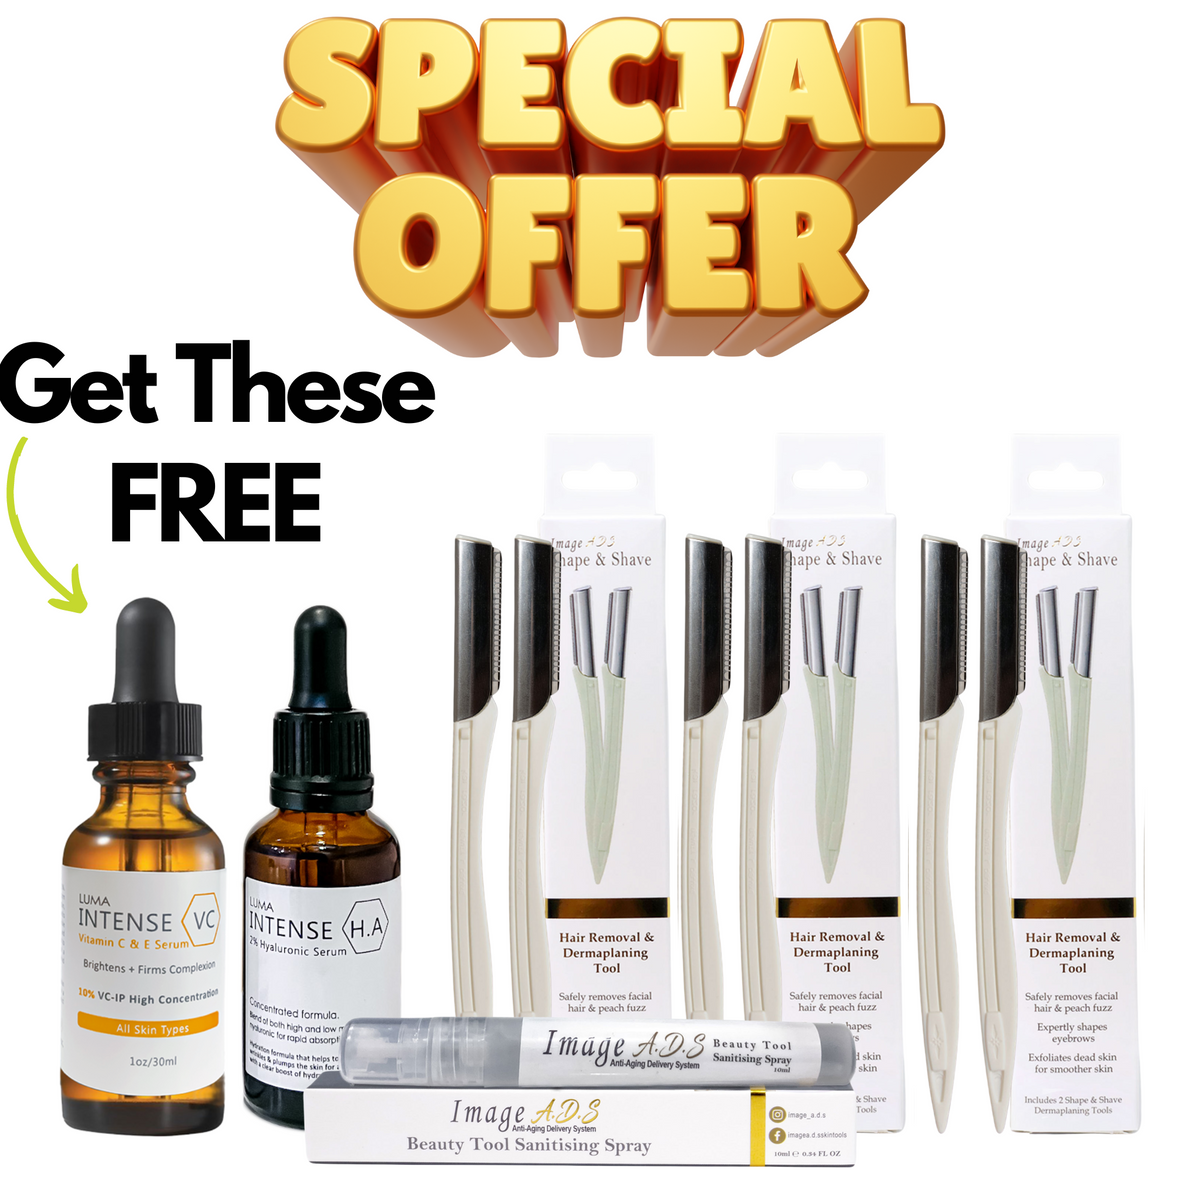 Special Offer - Buy 3 Shape & Shave + Get A Free Skincare Kit Worth €59